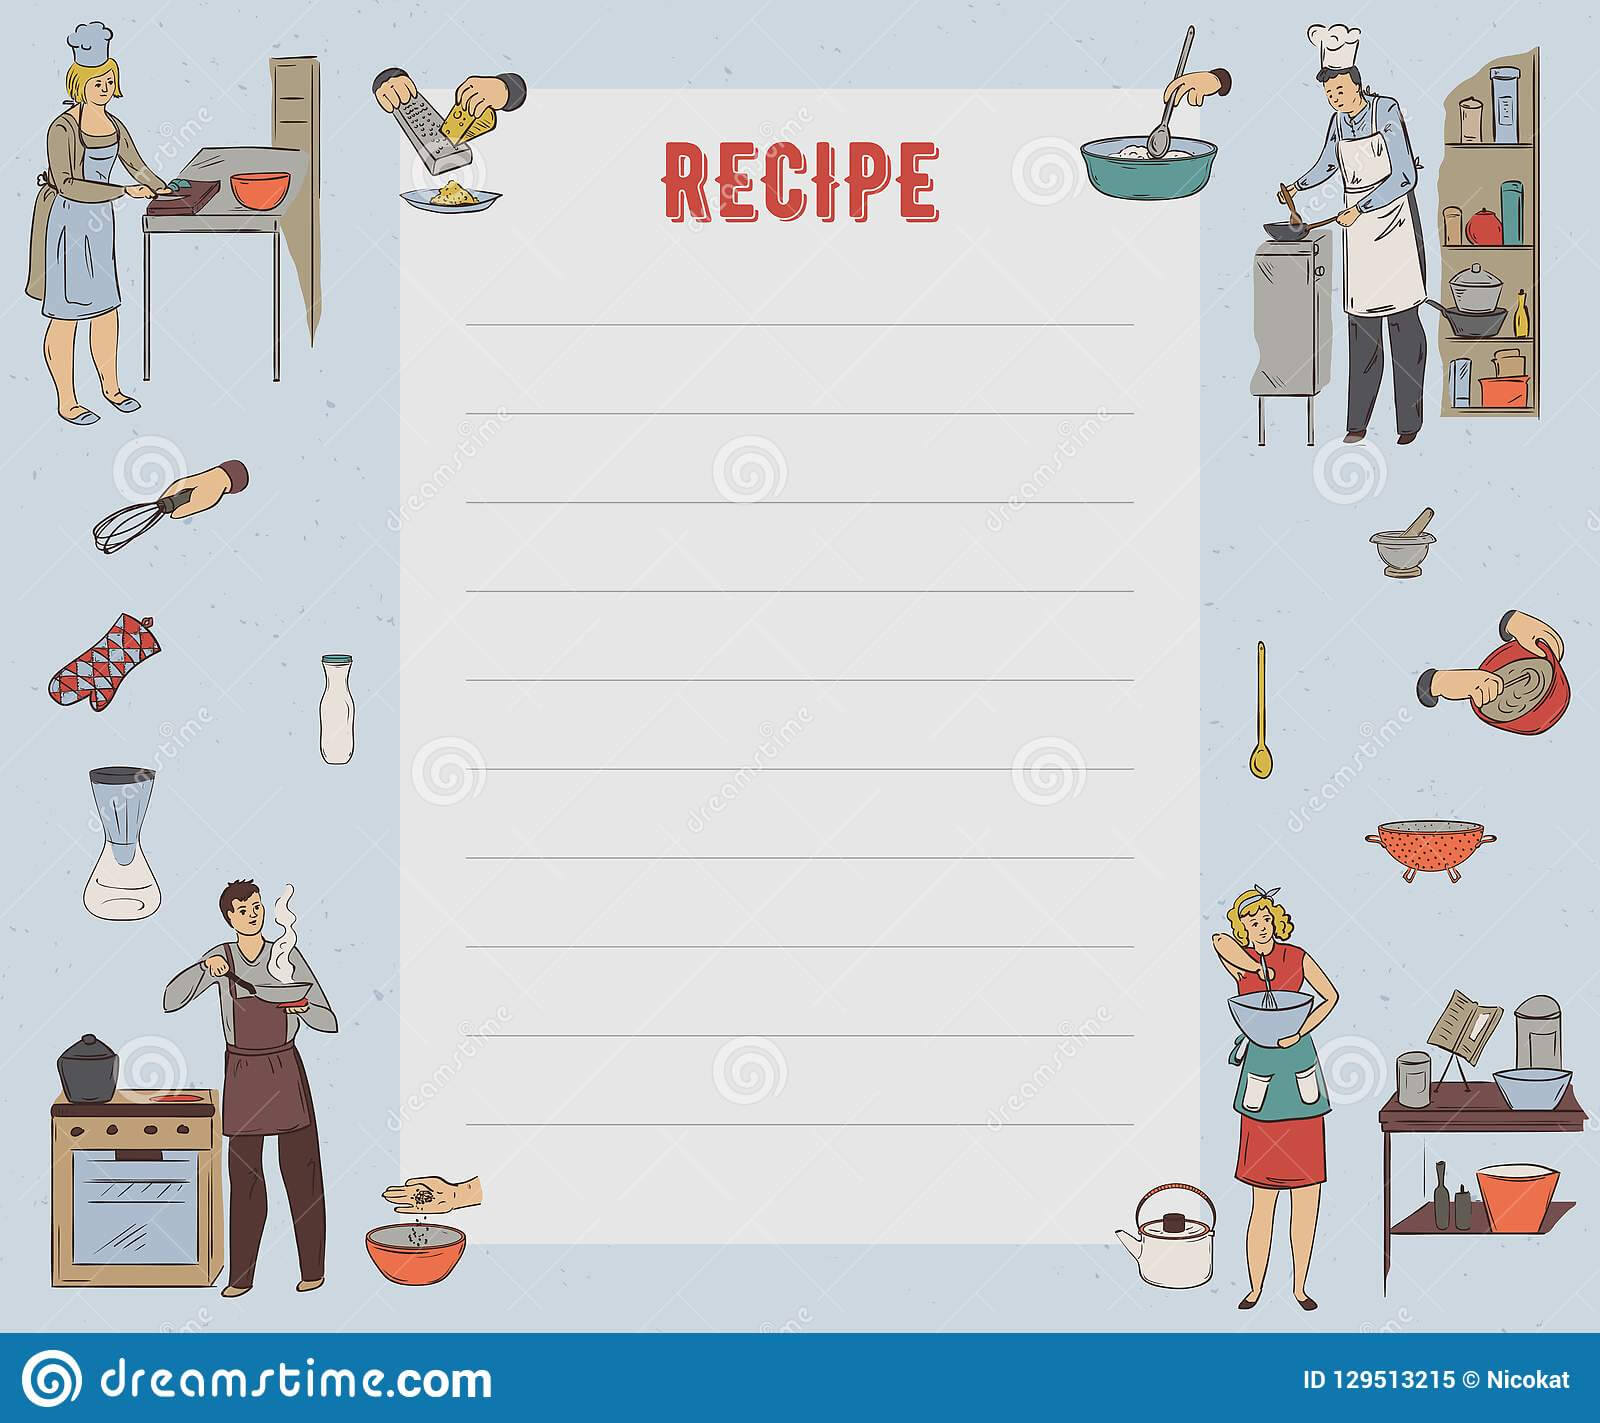 Recipe Card. Cookbook Page. Design Template With People For Restaurant Recipe Card Template